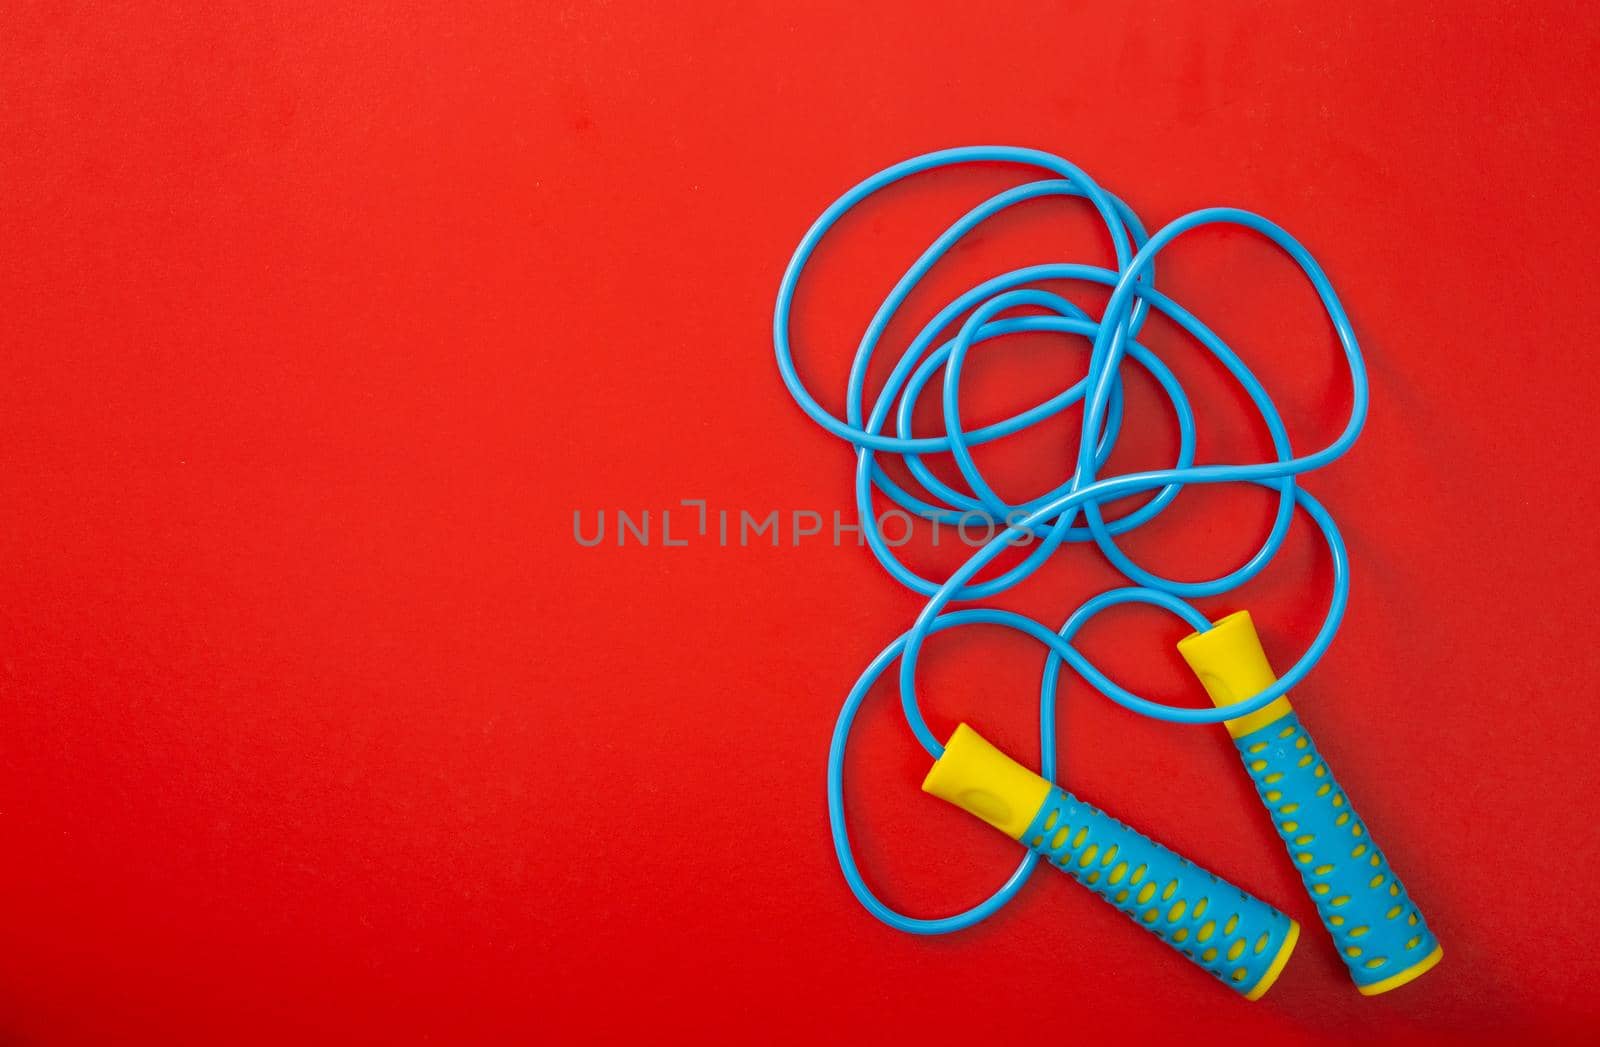 Minimalism fitness concept. Skipping rope on color background. Top view